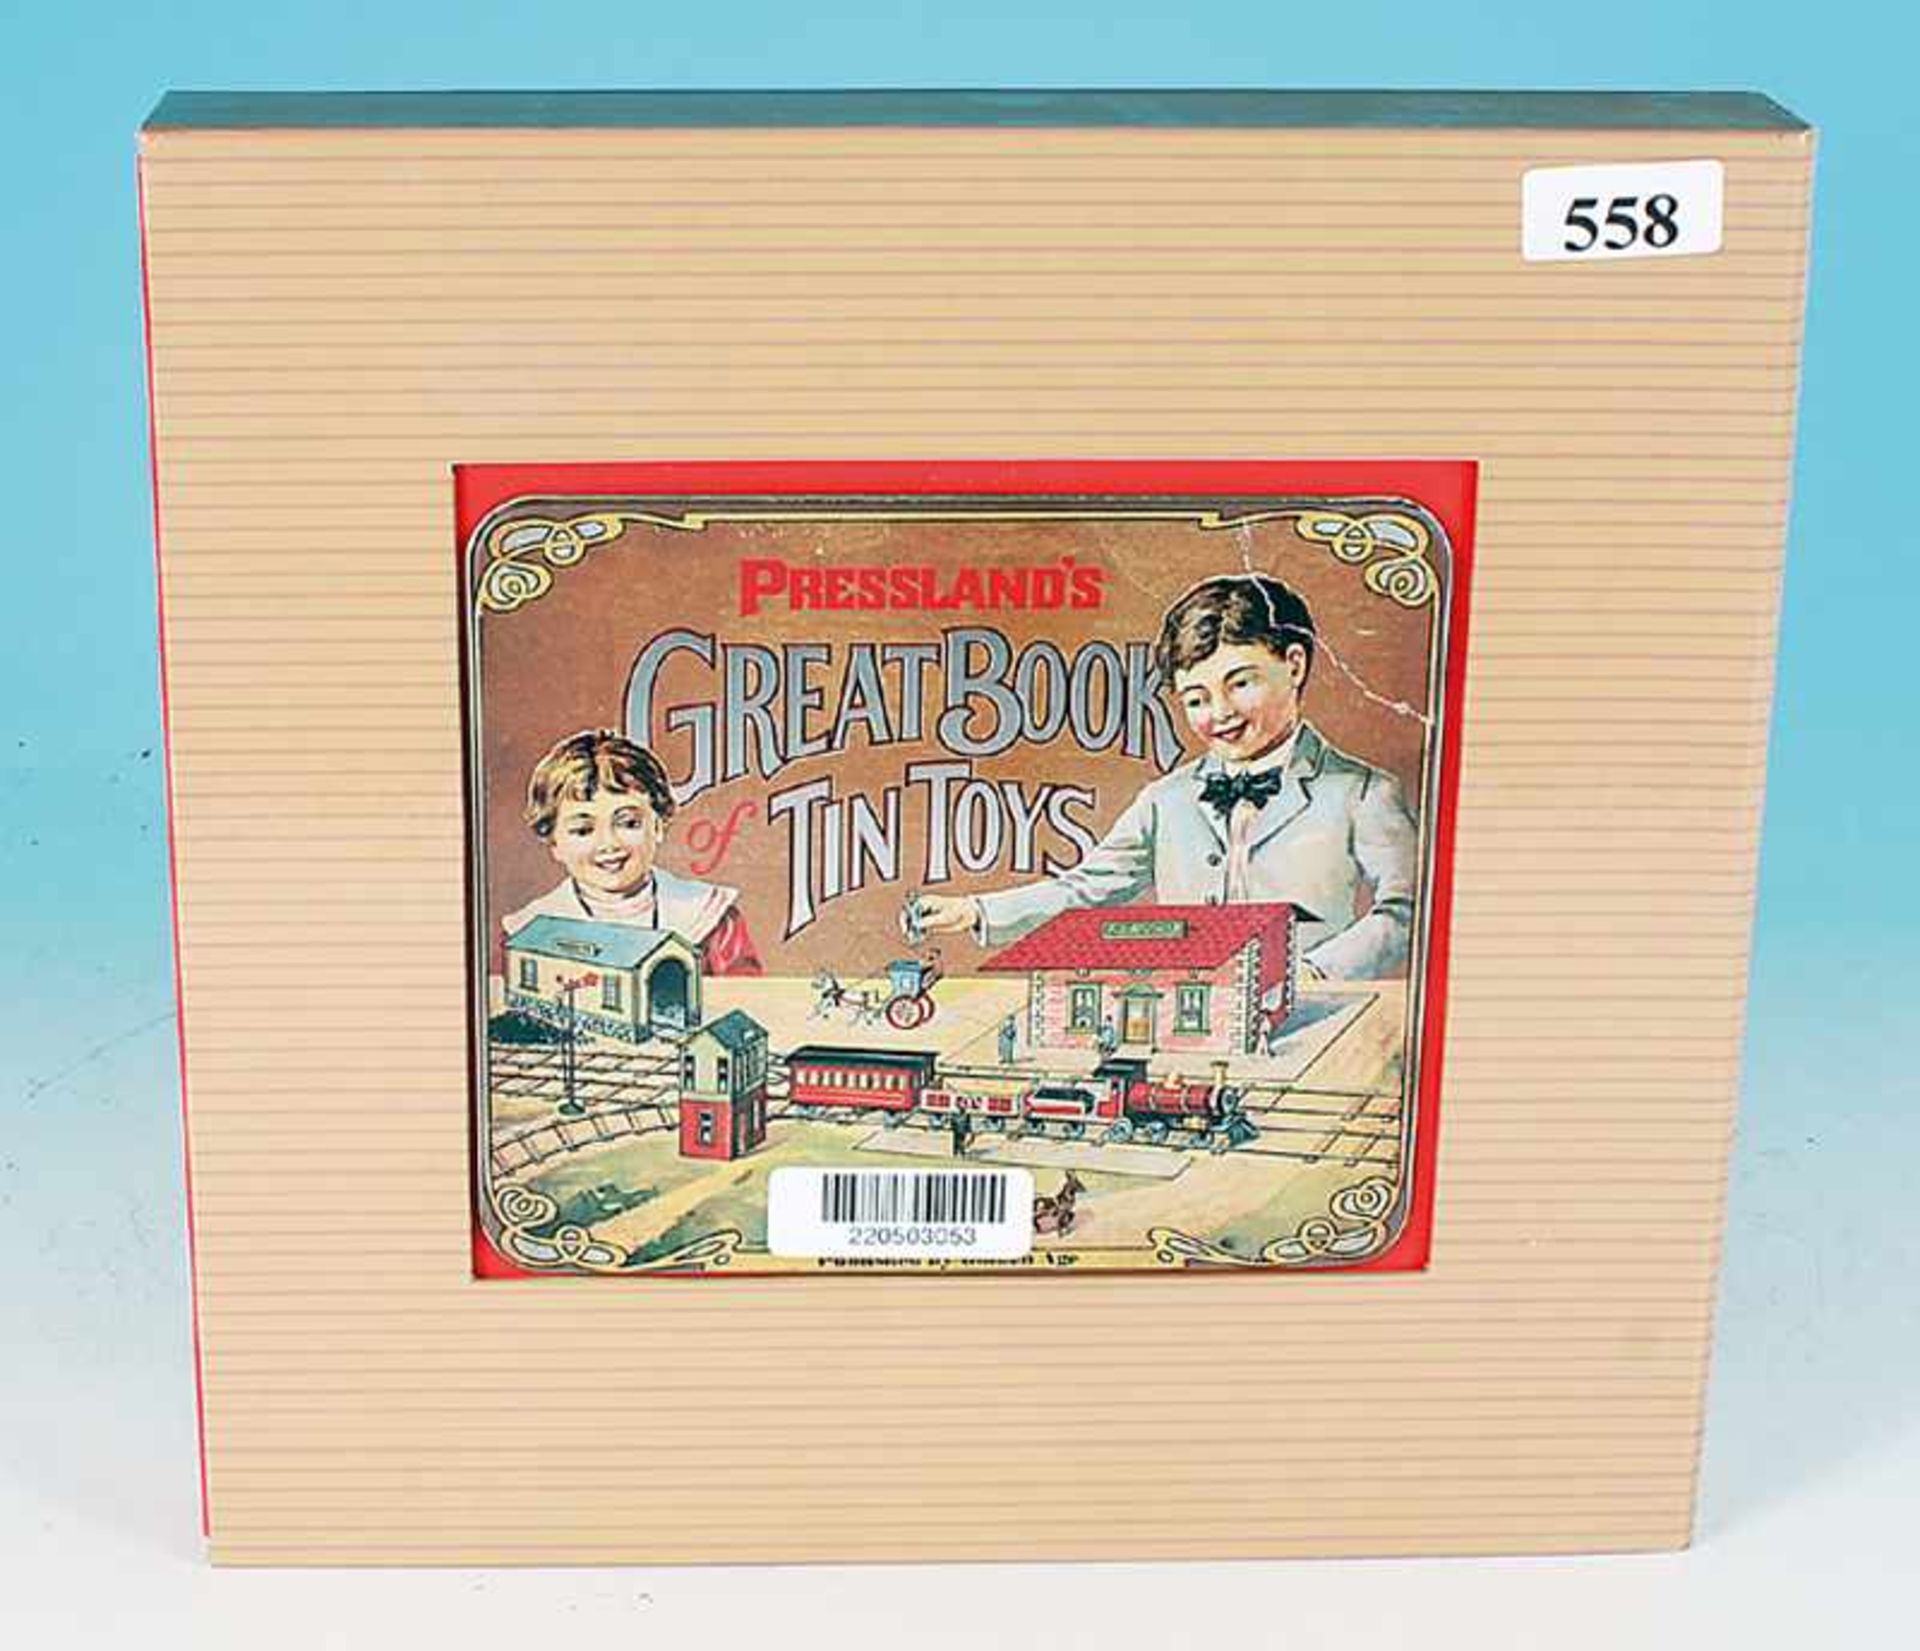 Great book of tin toys